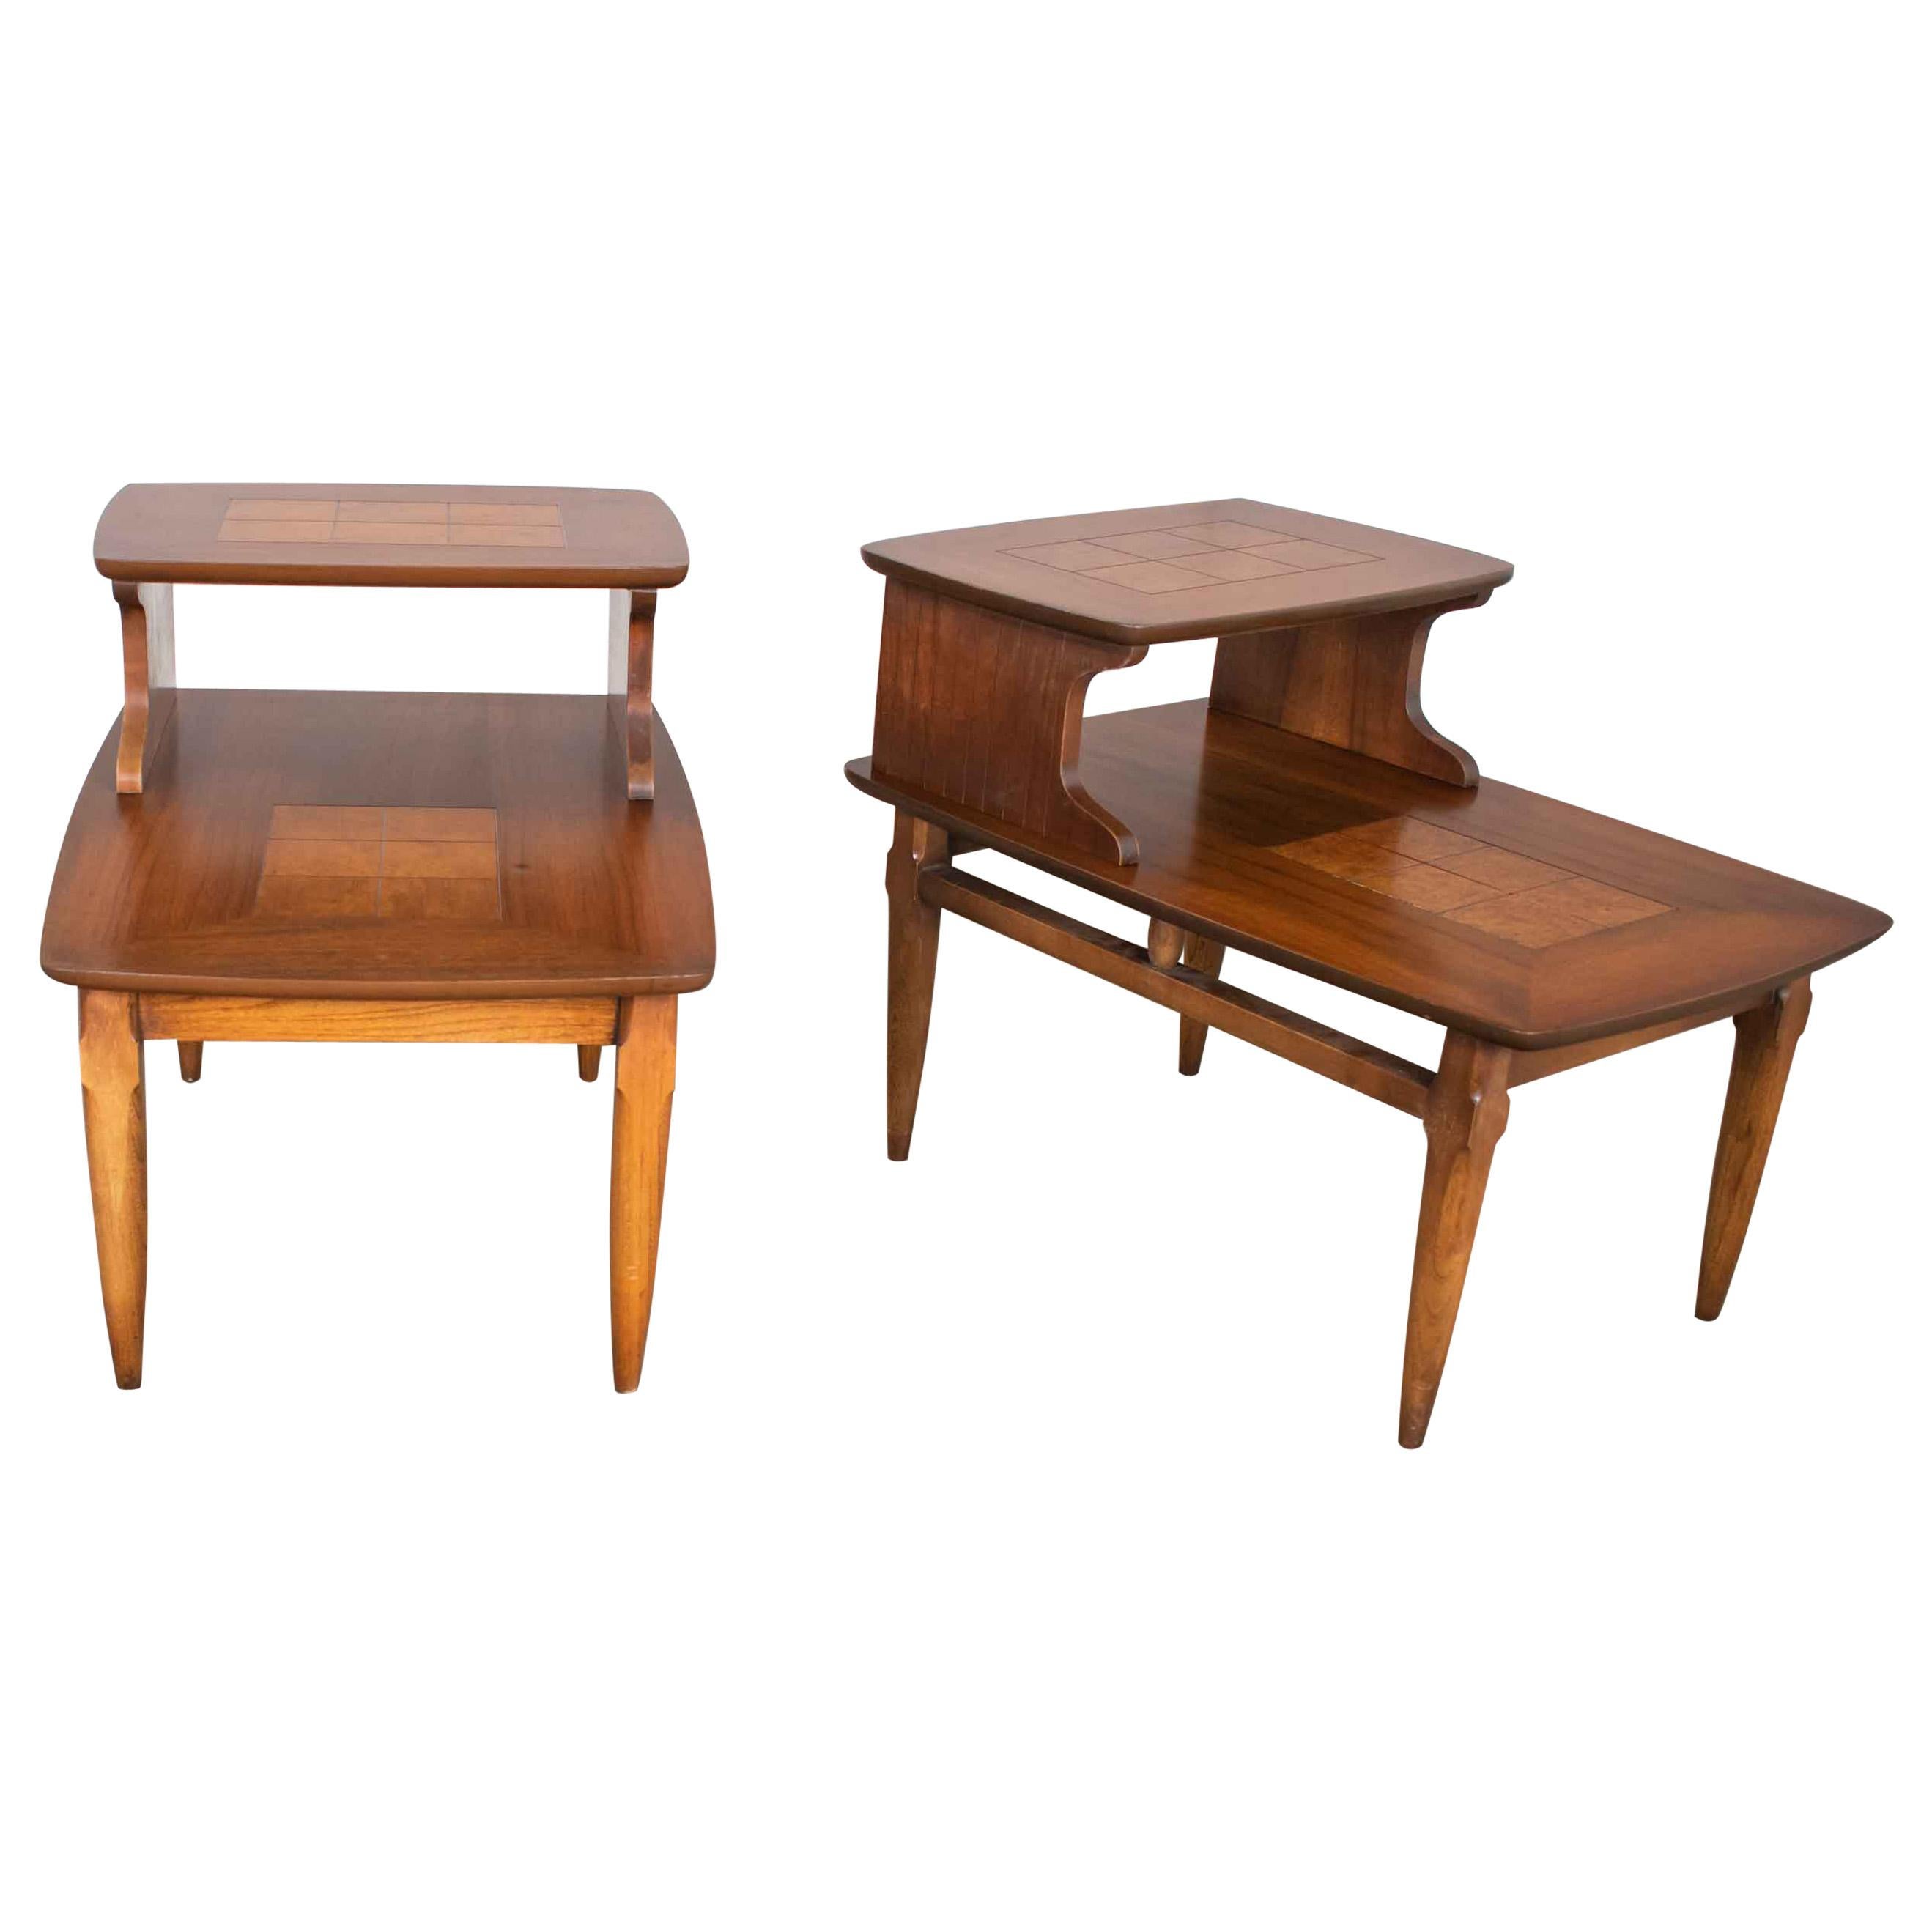 Mid-Century Modern Pair of Lane Step End Tables with Inlaid Walnut Burl Style